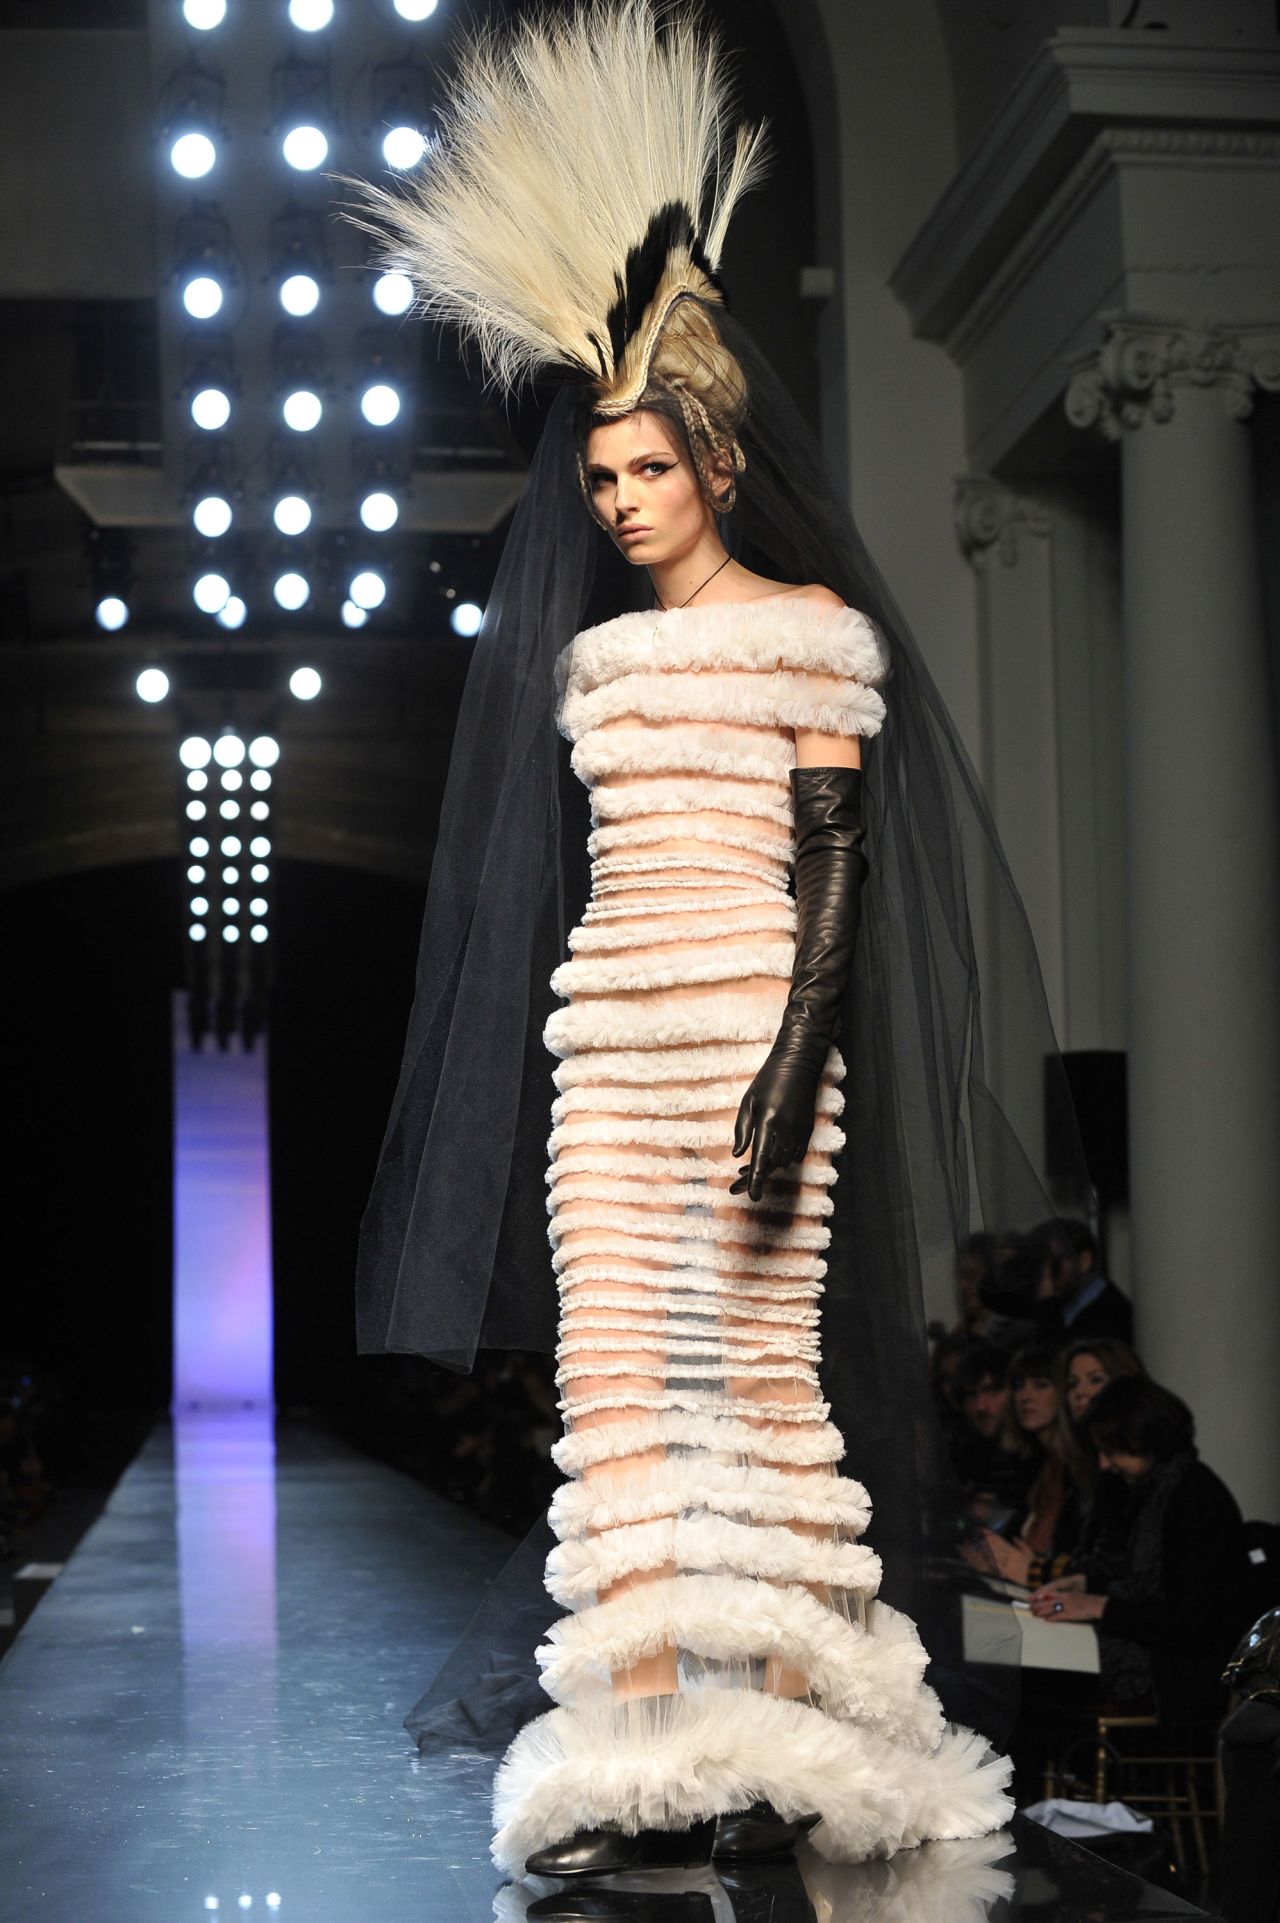 Gaultier's approach to casting and production was equally progressive. He's one of few designers to consistently feature models of color on the catwalk and, in 2011, he was one of the first designers to work with trans model Andreja Pejic (who then went by Andrej). (Pictured: Andreja Pejic walks Jean Paul Gaultier Haute Couture Spring-Summer 2011) 